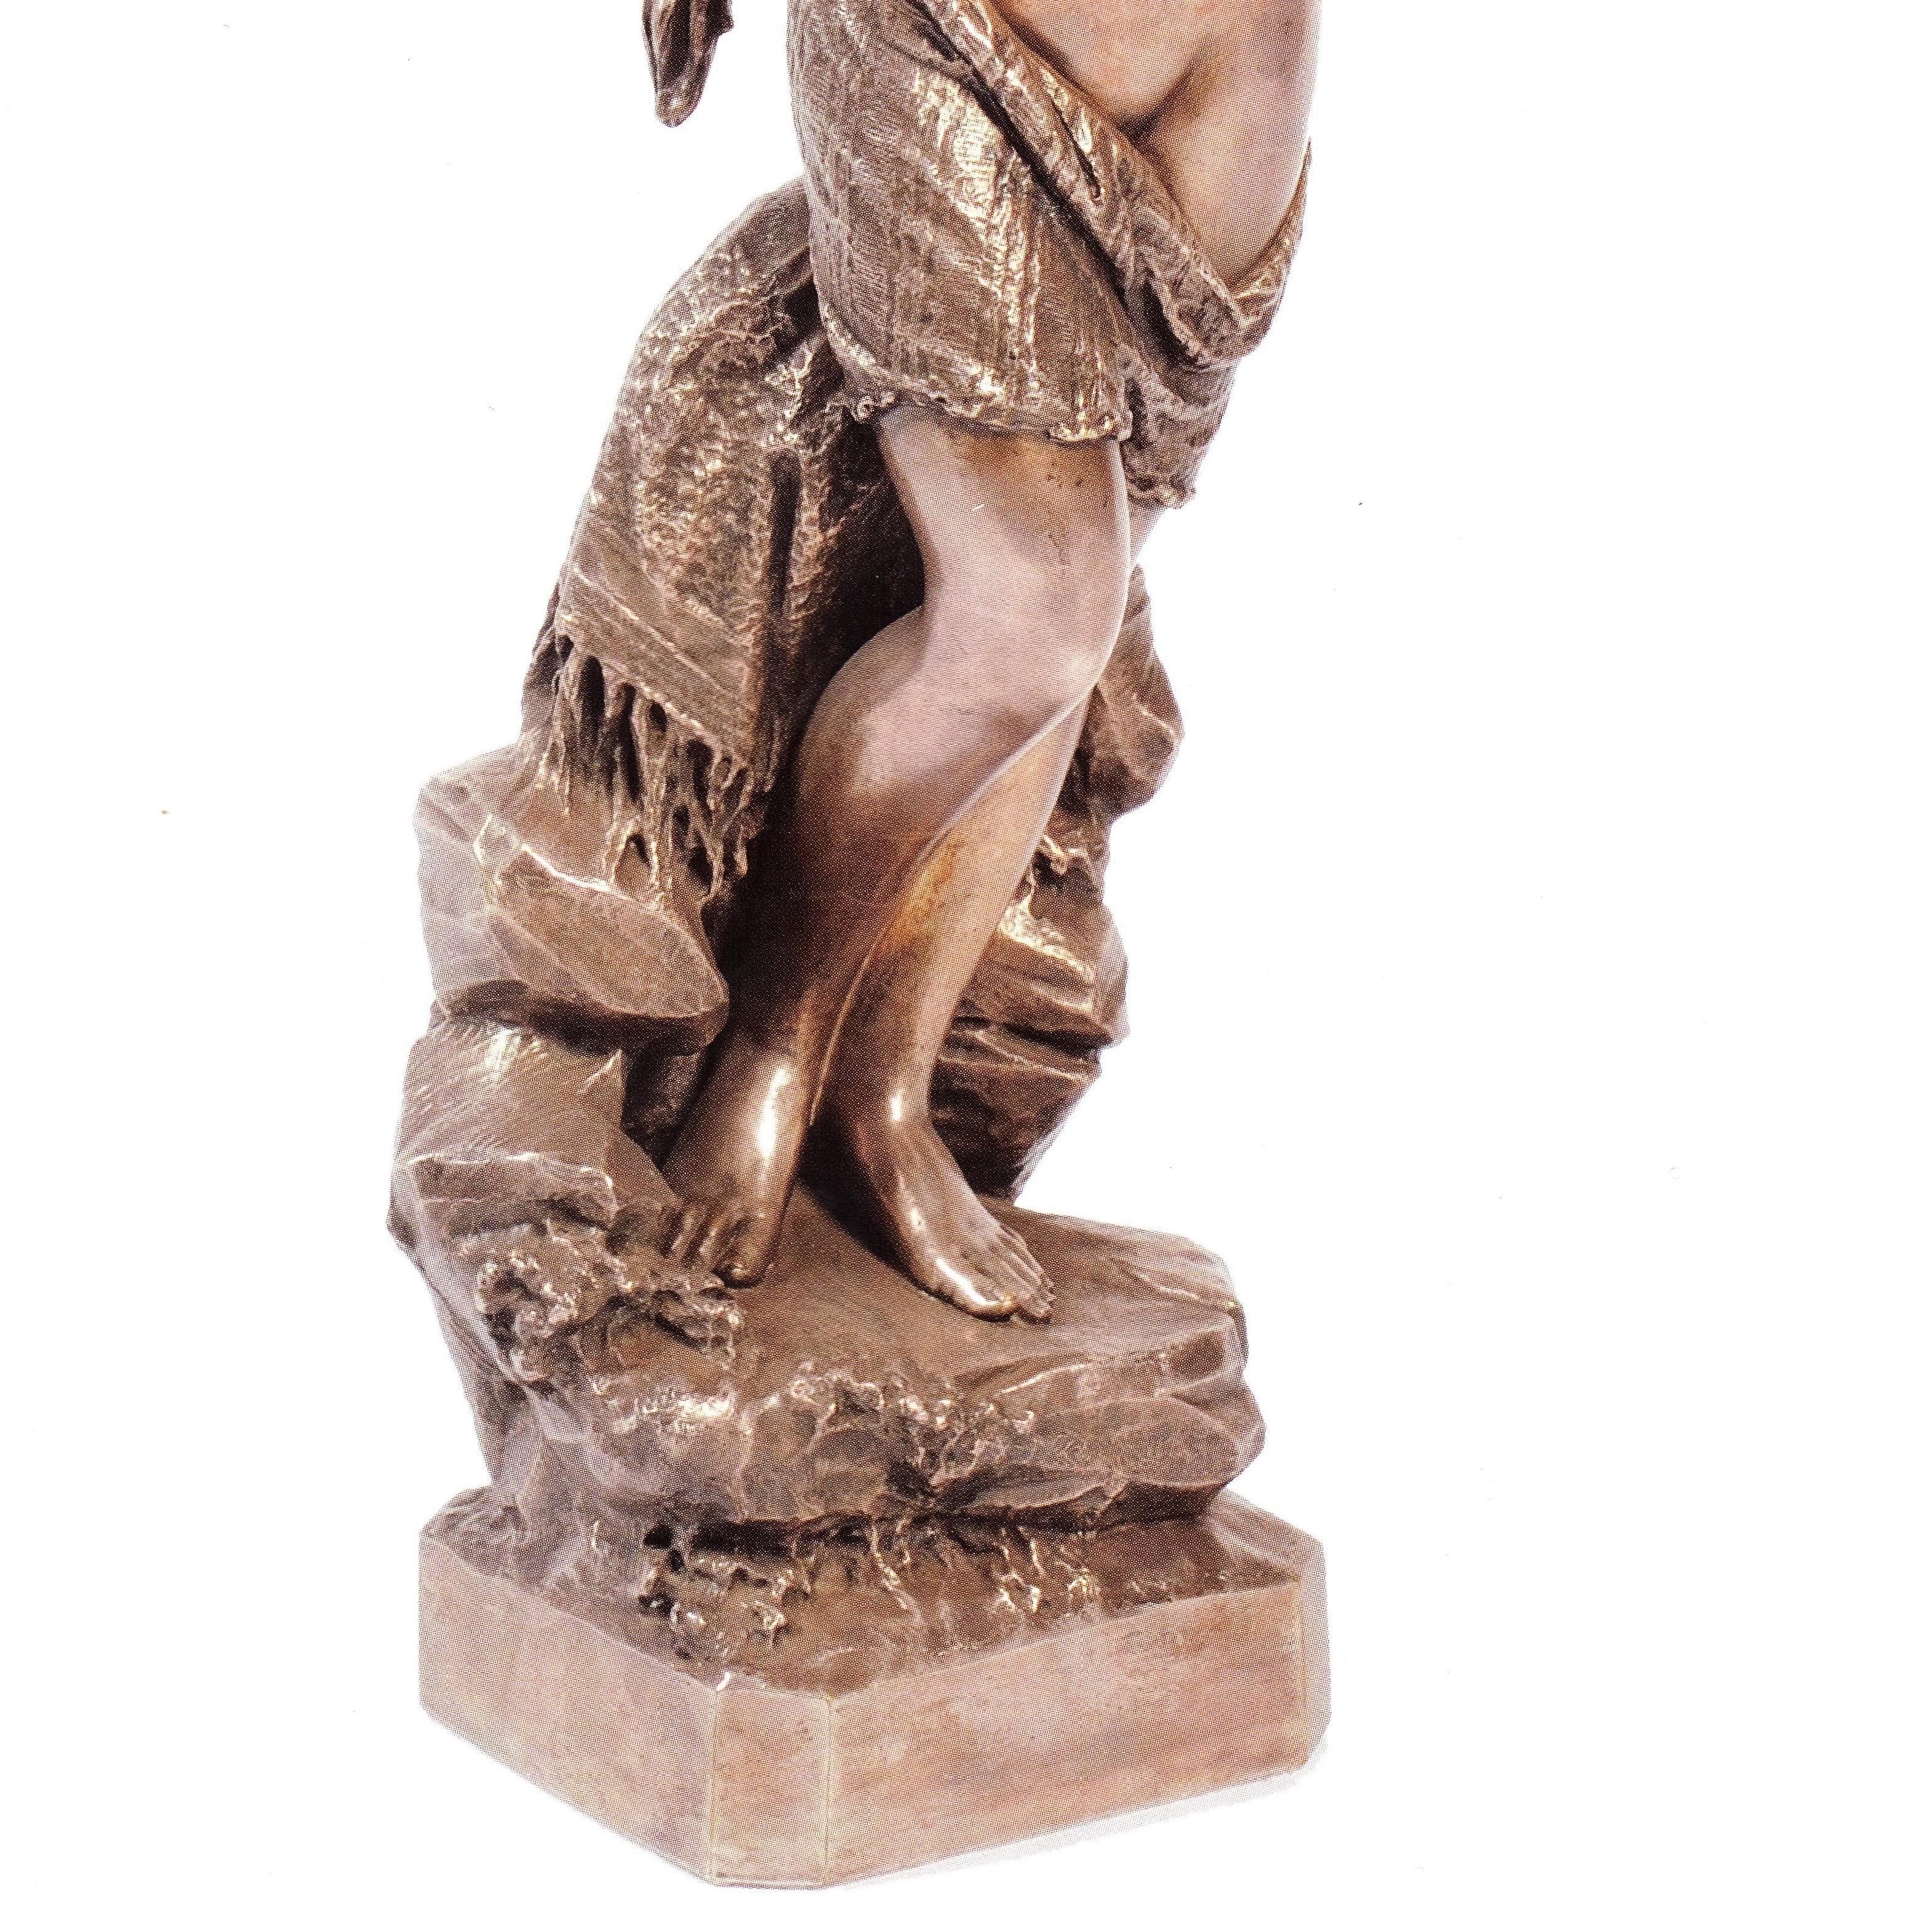 Silver plated Bronze representing a young odalisque, realized in 1886 by the Italian sculptor Giuseppe Salvi (1836-1905).
Signature, place and year engraved on base: G. Salvi fece Roma 1886. On base: 